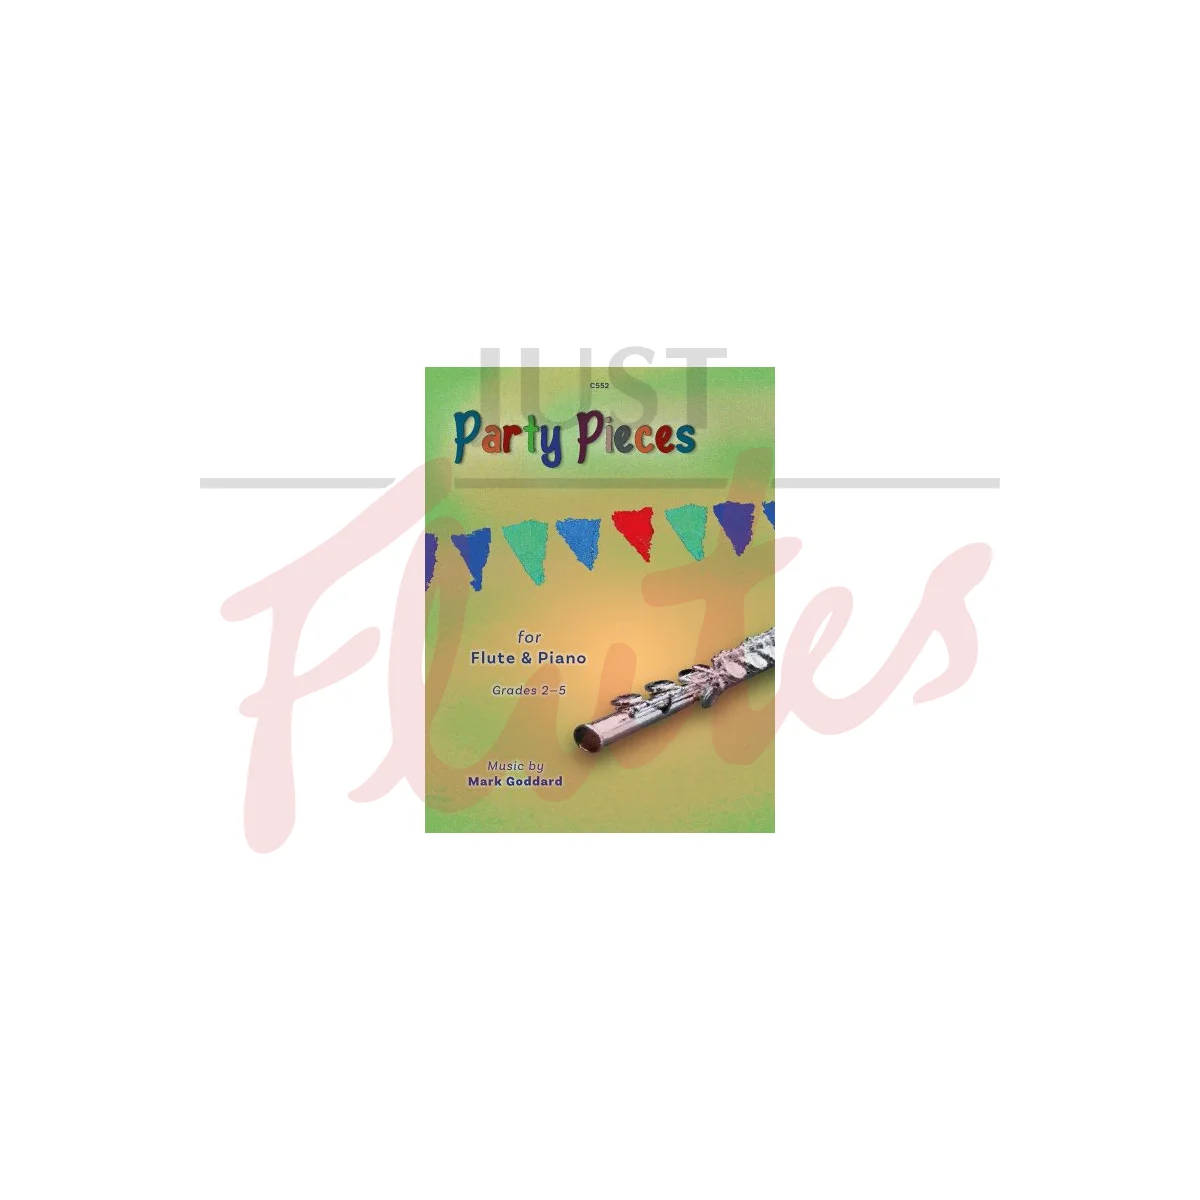 Party Pieces for Flute and Piano